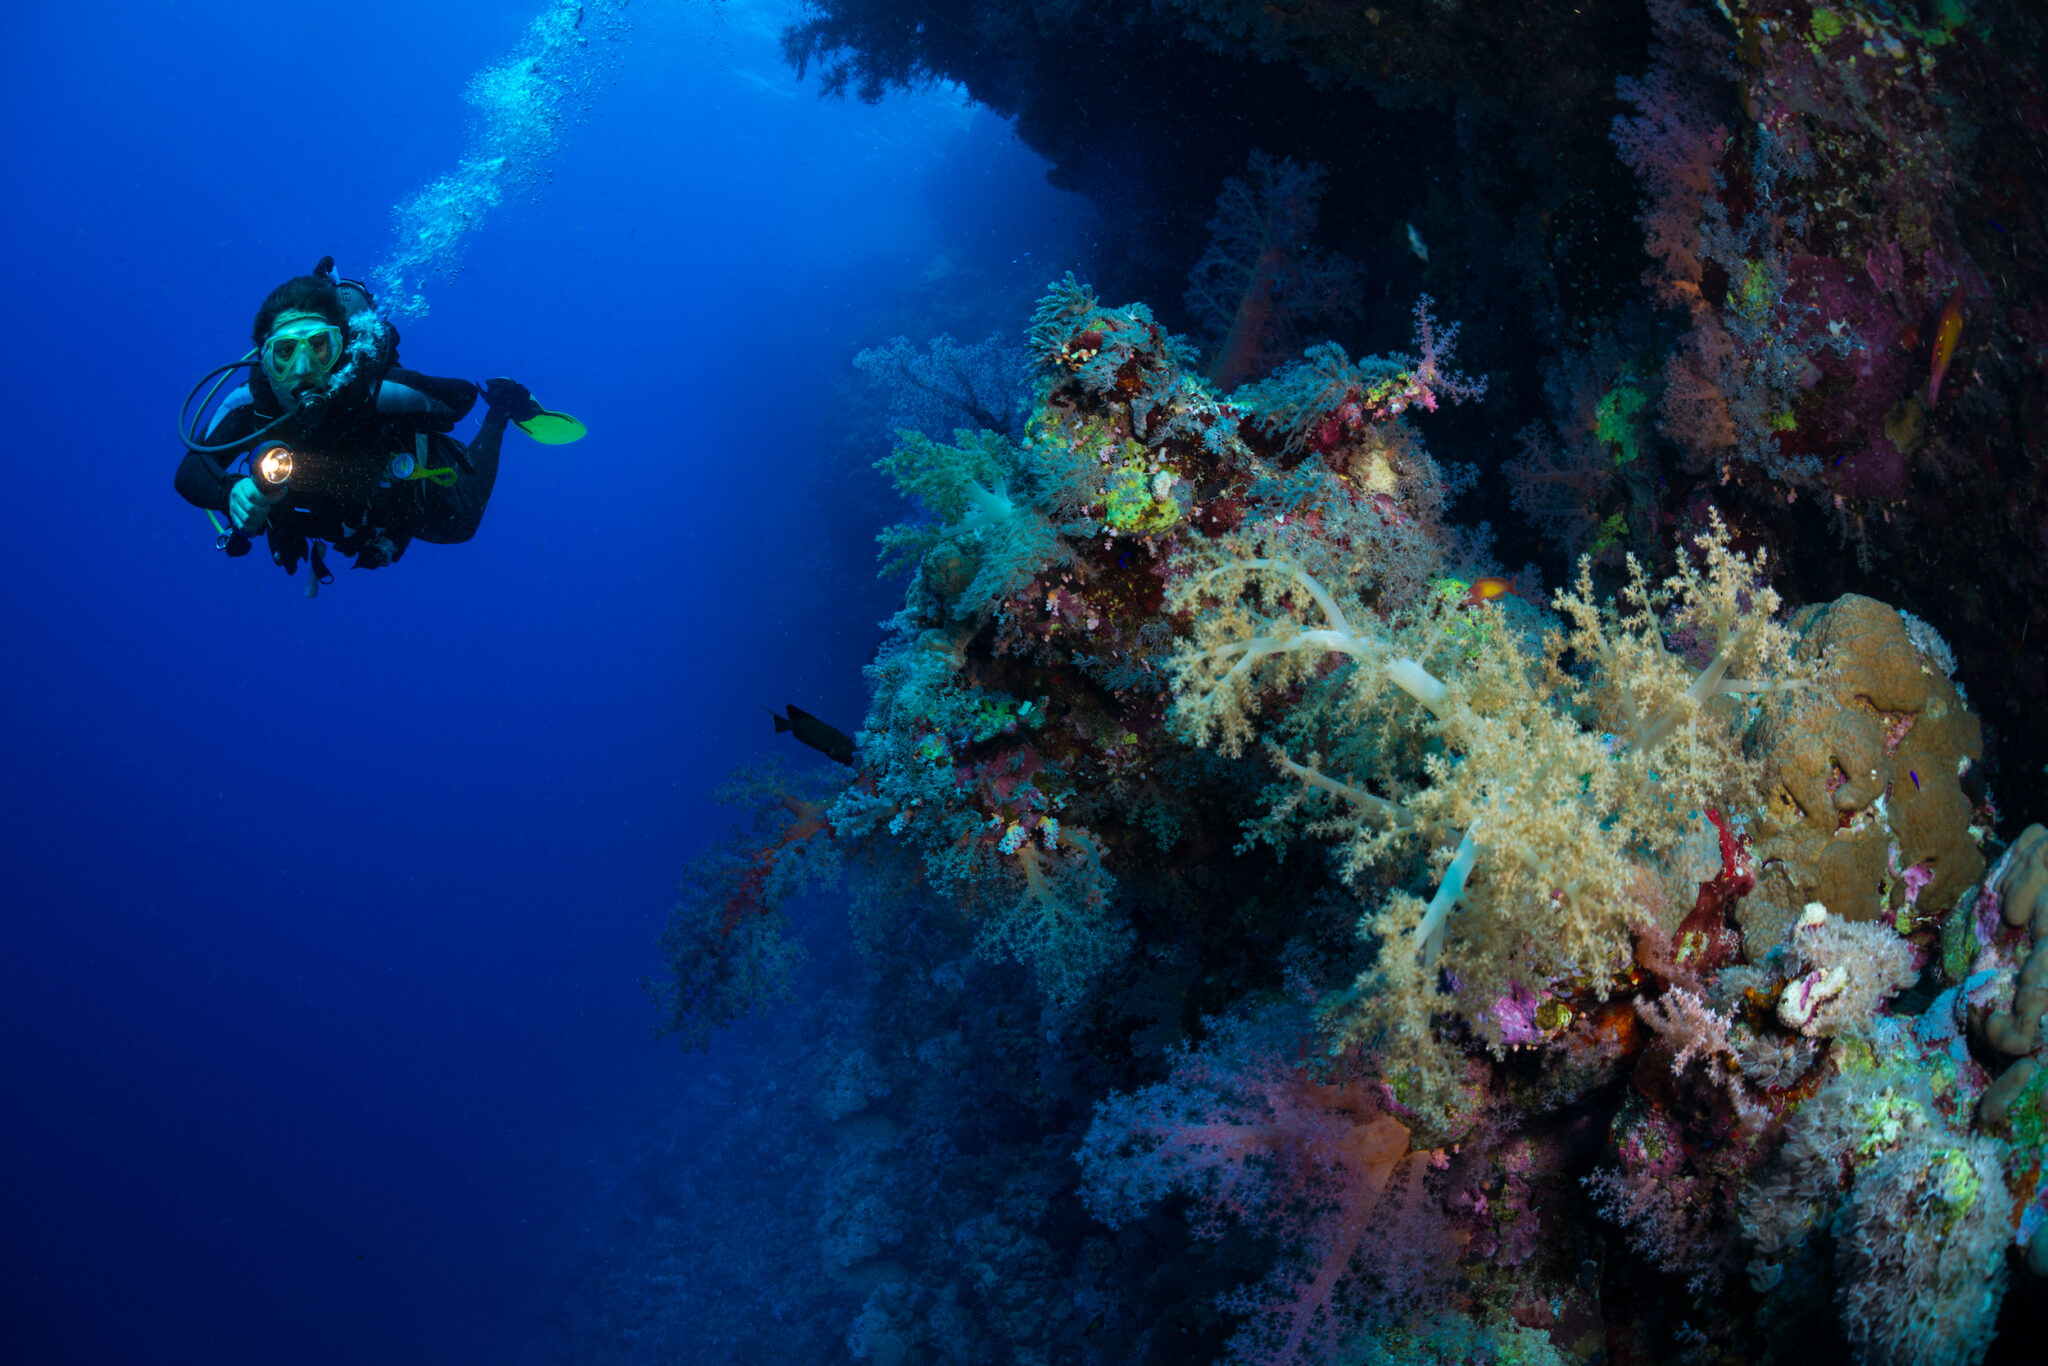 A scuba diver swimming along a coral reef during a deep dive as part of their PADI Advanced Open Water Diver course